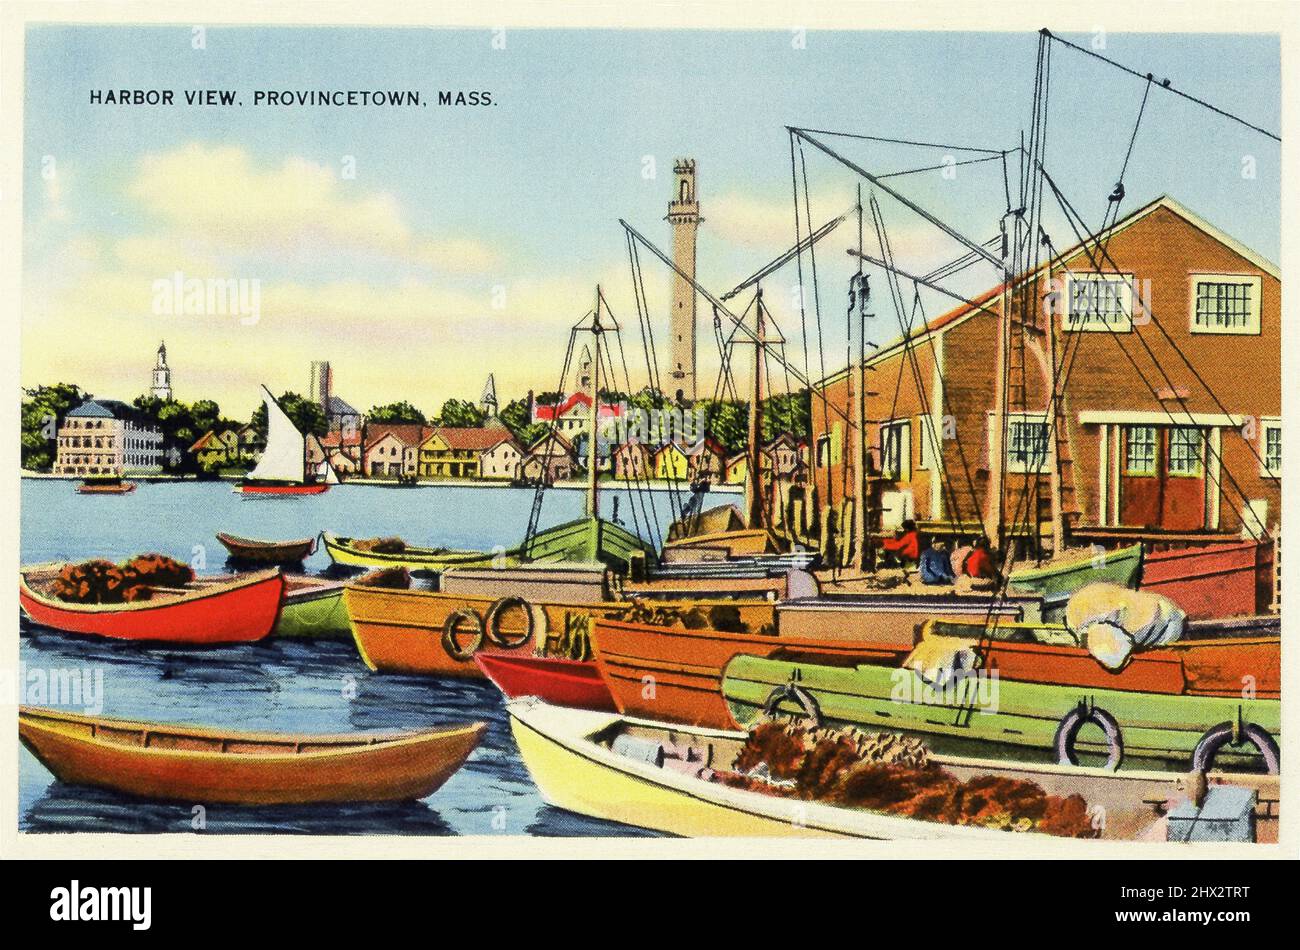 https://c8.alamy.com/comp/2HX2TRT/this-vintage-postcard-dating-to-the-1930s-shows-the-harbor-at-provincetown-massachusetts-on-cape-cod-with-dingies-and-fishing-boats-2HX2TRT.jpg